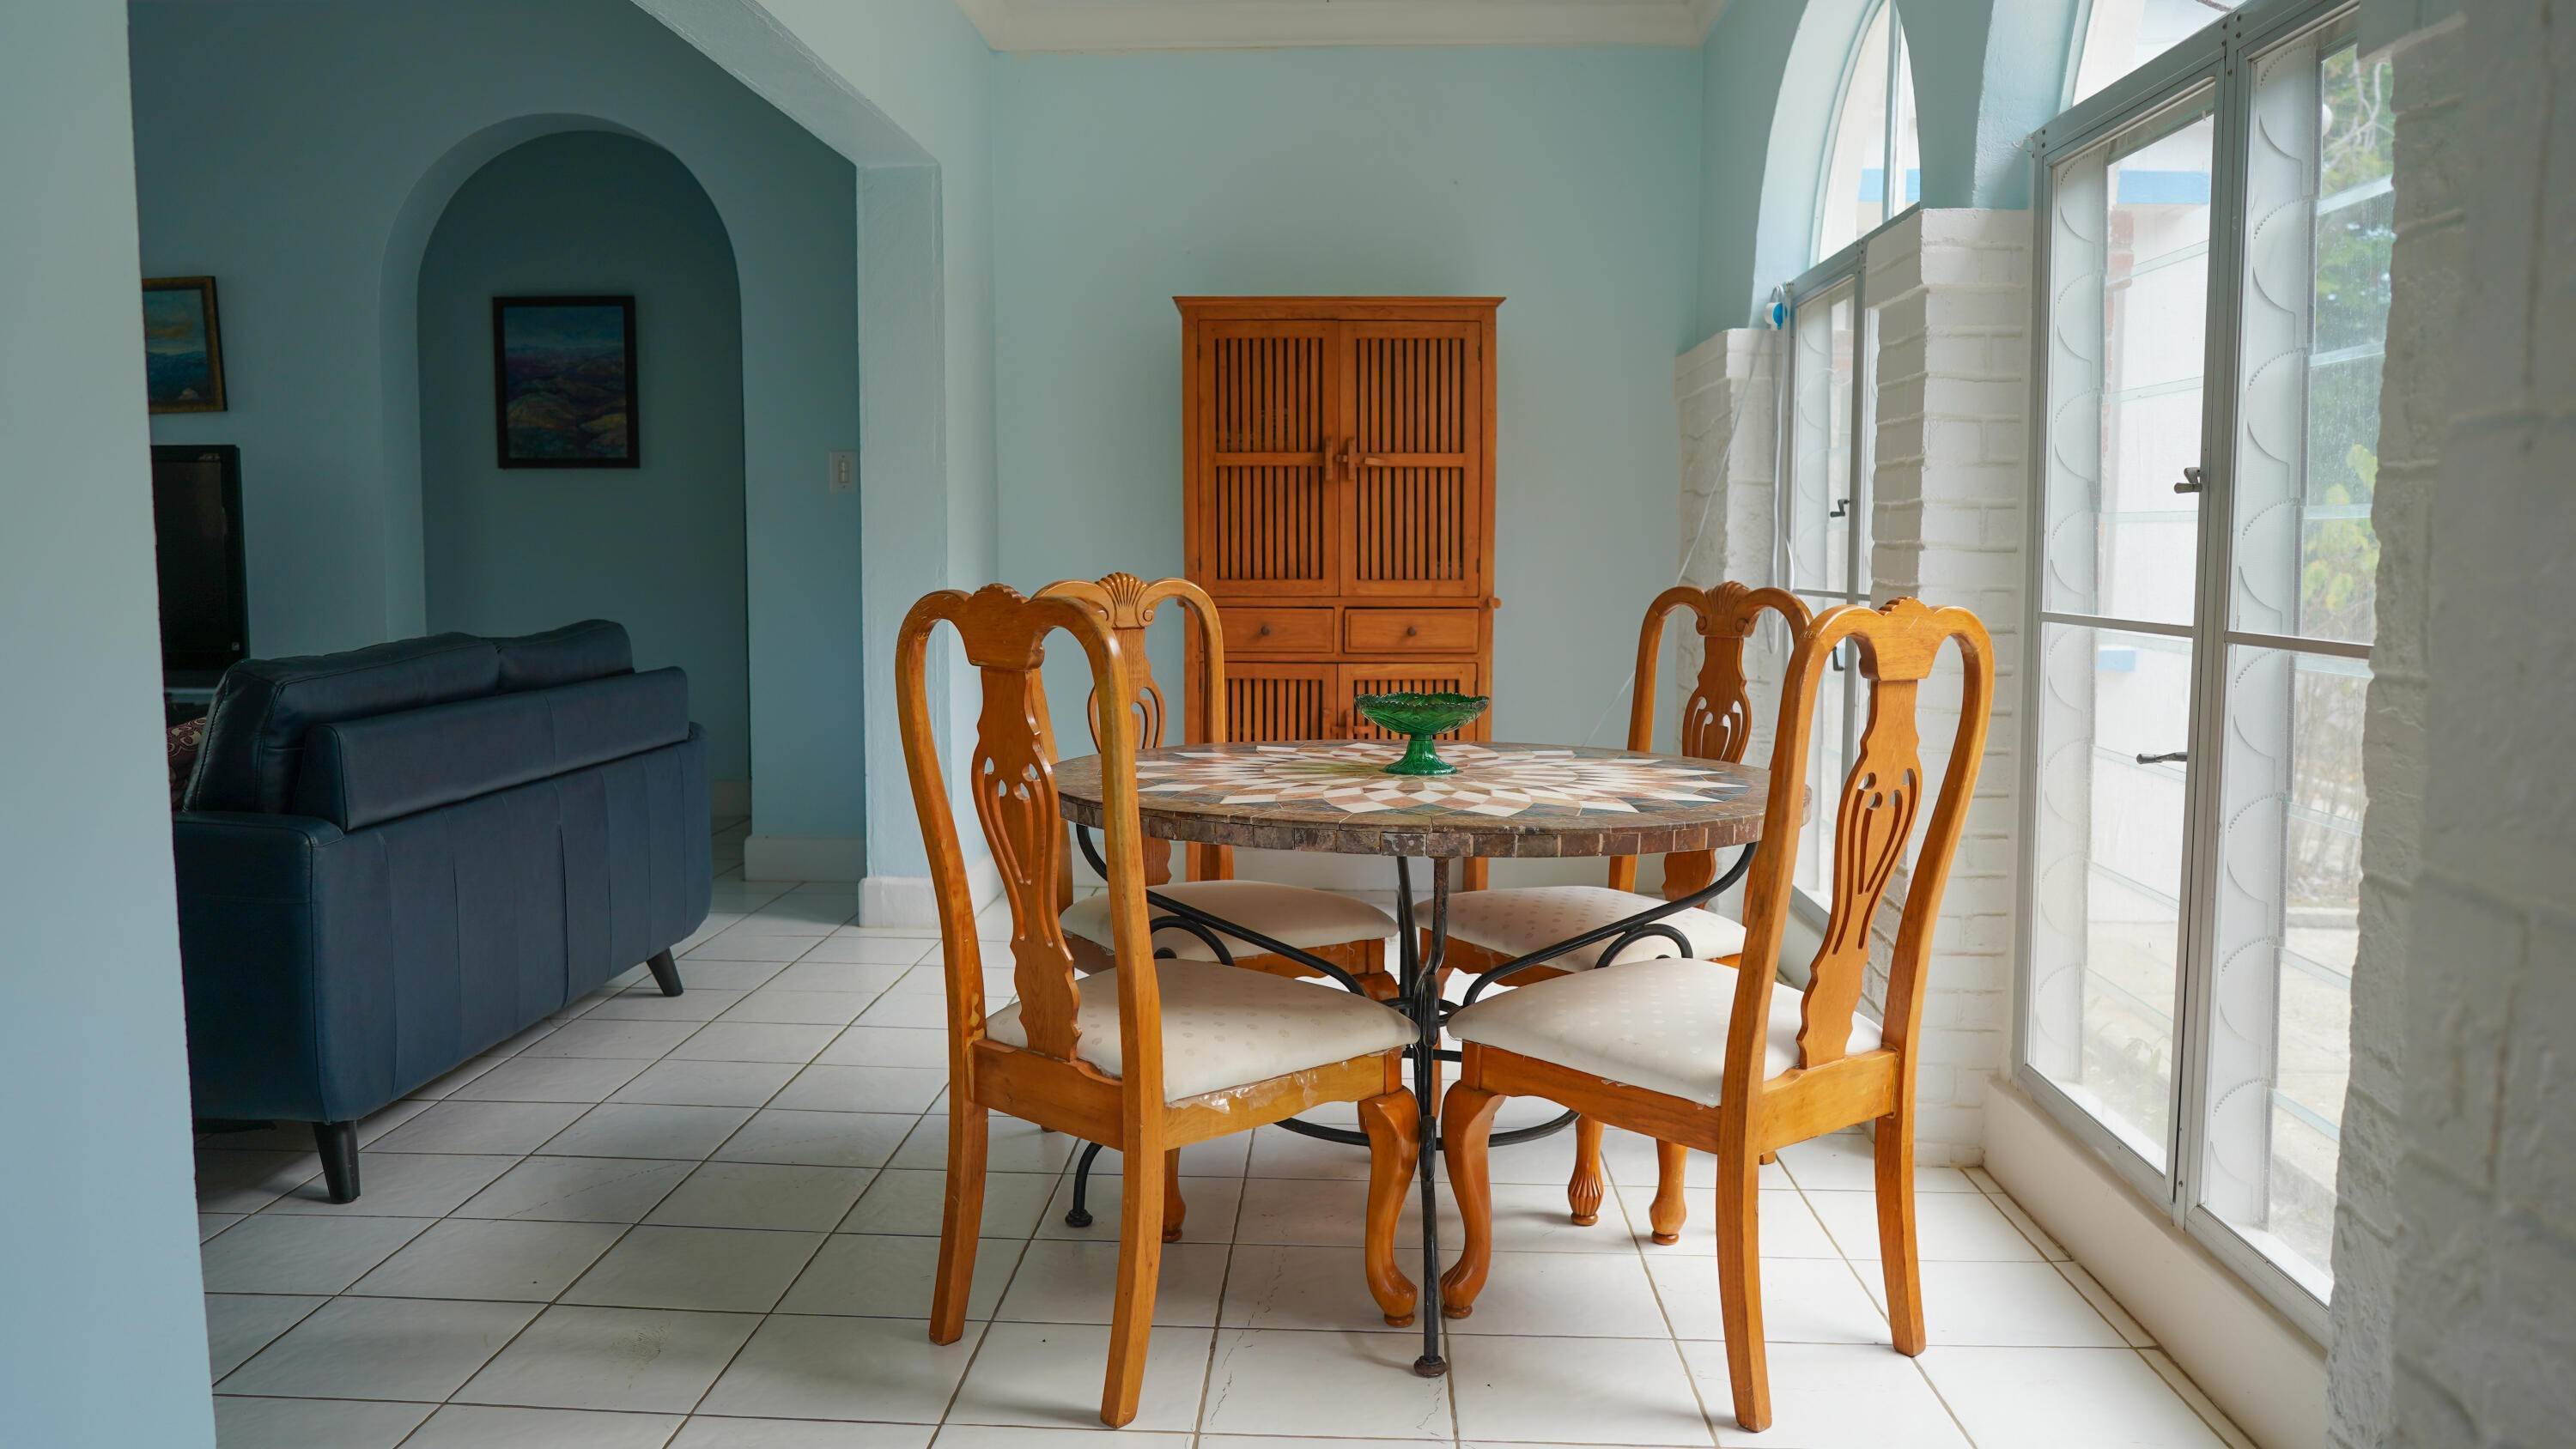 28. Single Family Homes for Sale at 7 AND 9 Altona EA St Croix, Virgin Islands 00820 United States Virgin Islands